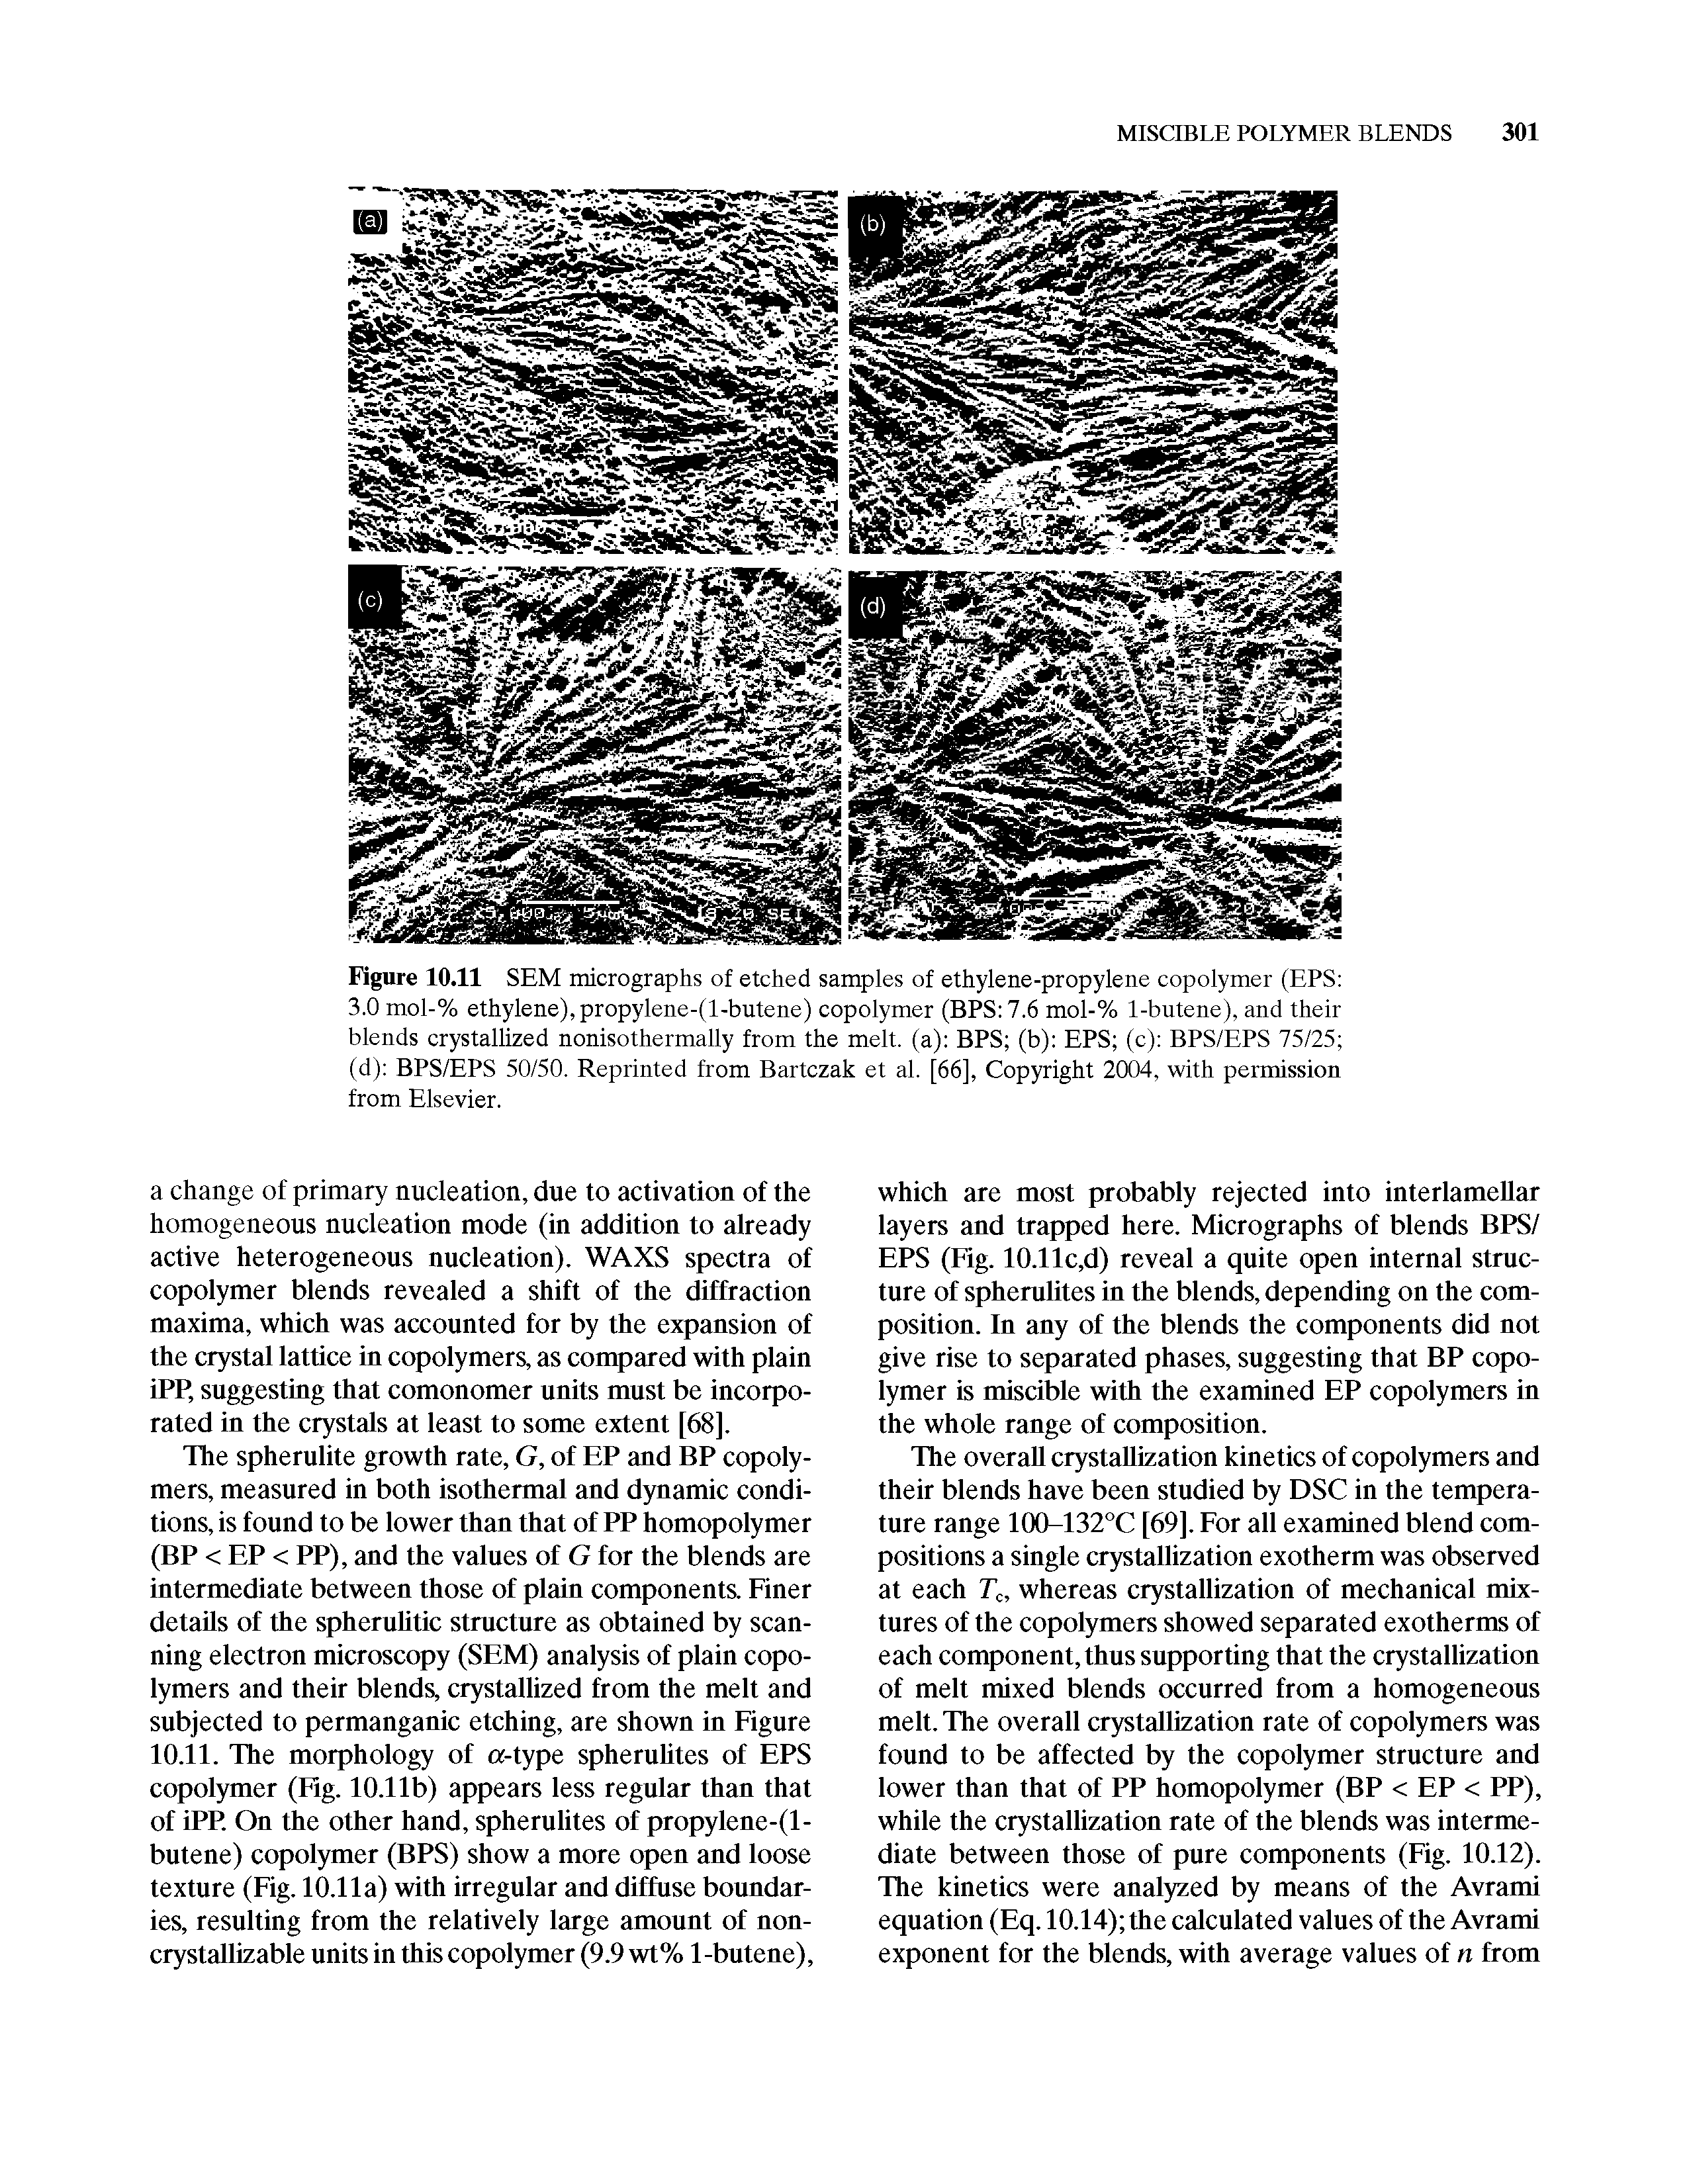 Figure 10.11 SEM micrographs of etched samples of ethylene-propylene copolymer (EPS 3.0 mol-% ethylene), propylene-(l-butene) copolymer (BPS 7.6 mol-% 1-butene), and their blends crystallized nonisothermally from the melt, (a) BPS (b) EPS (c) BPS/EPS 75/25 (d) BPS/EPS 50/50. Reprinted from Bartczak et al. [66], Copyright 2004, with permission from Elsevier.